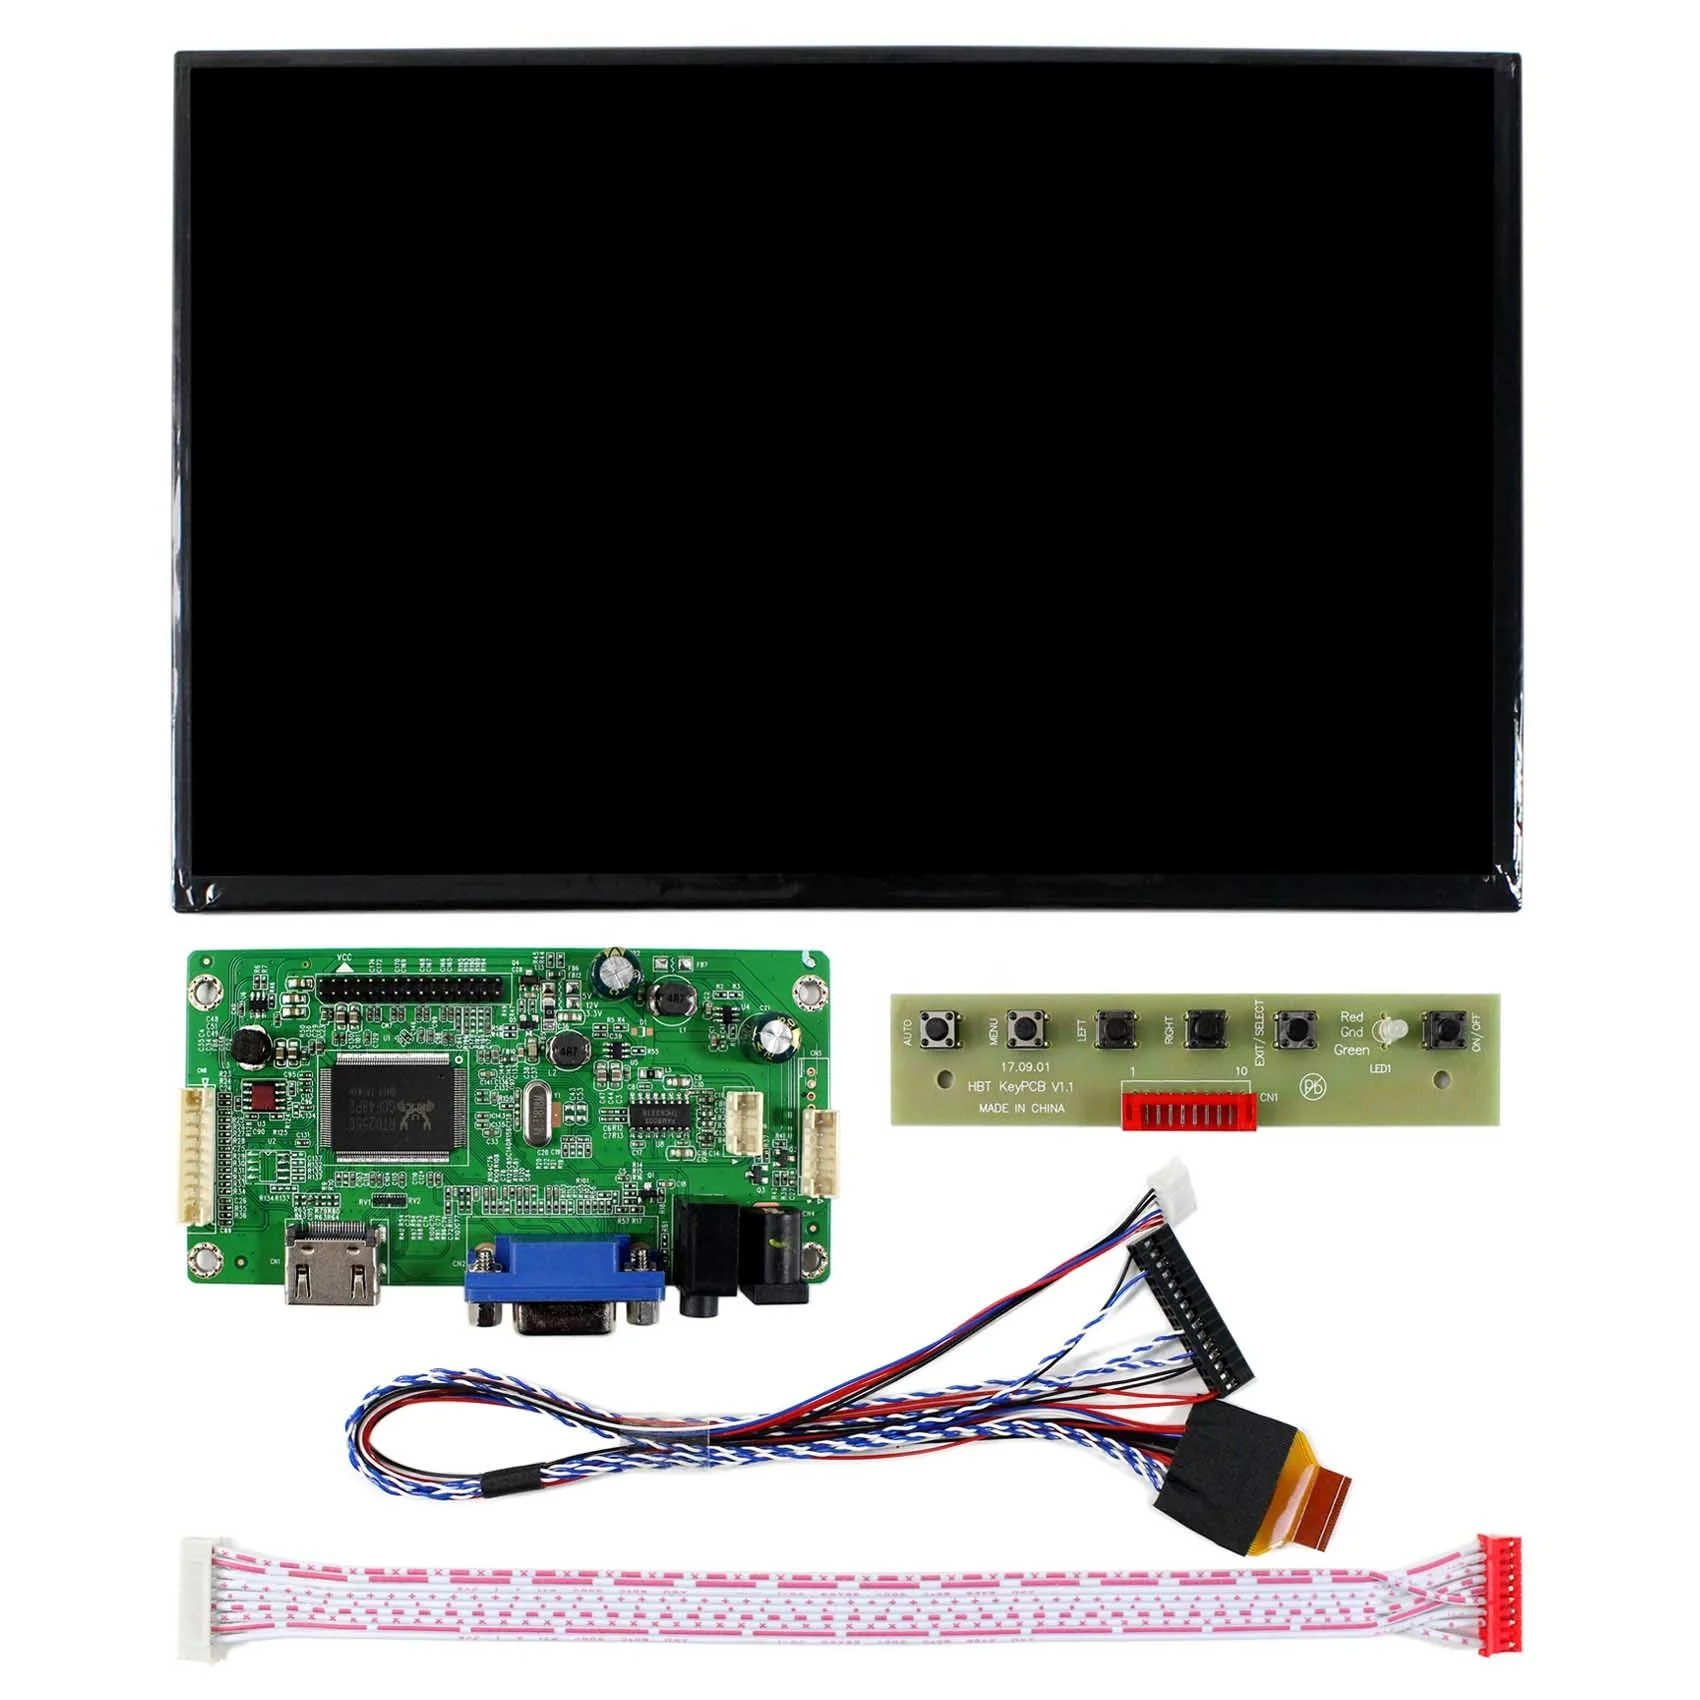 10.1inch 1920x1200 IPS LCD Panel B101UAN01.A with LCD Controller Board